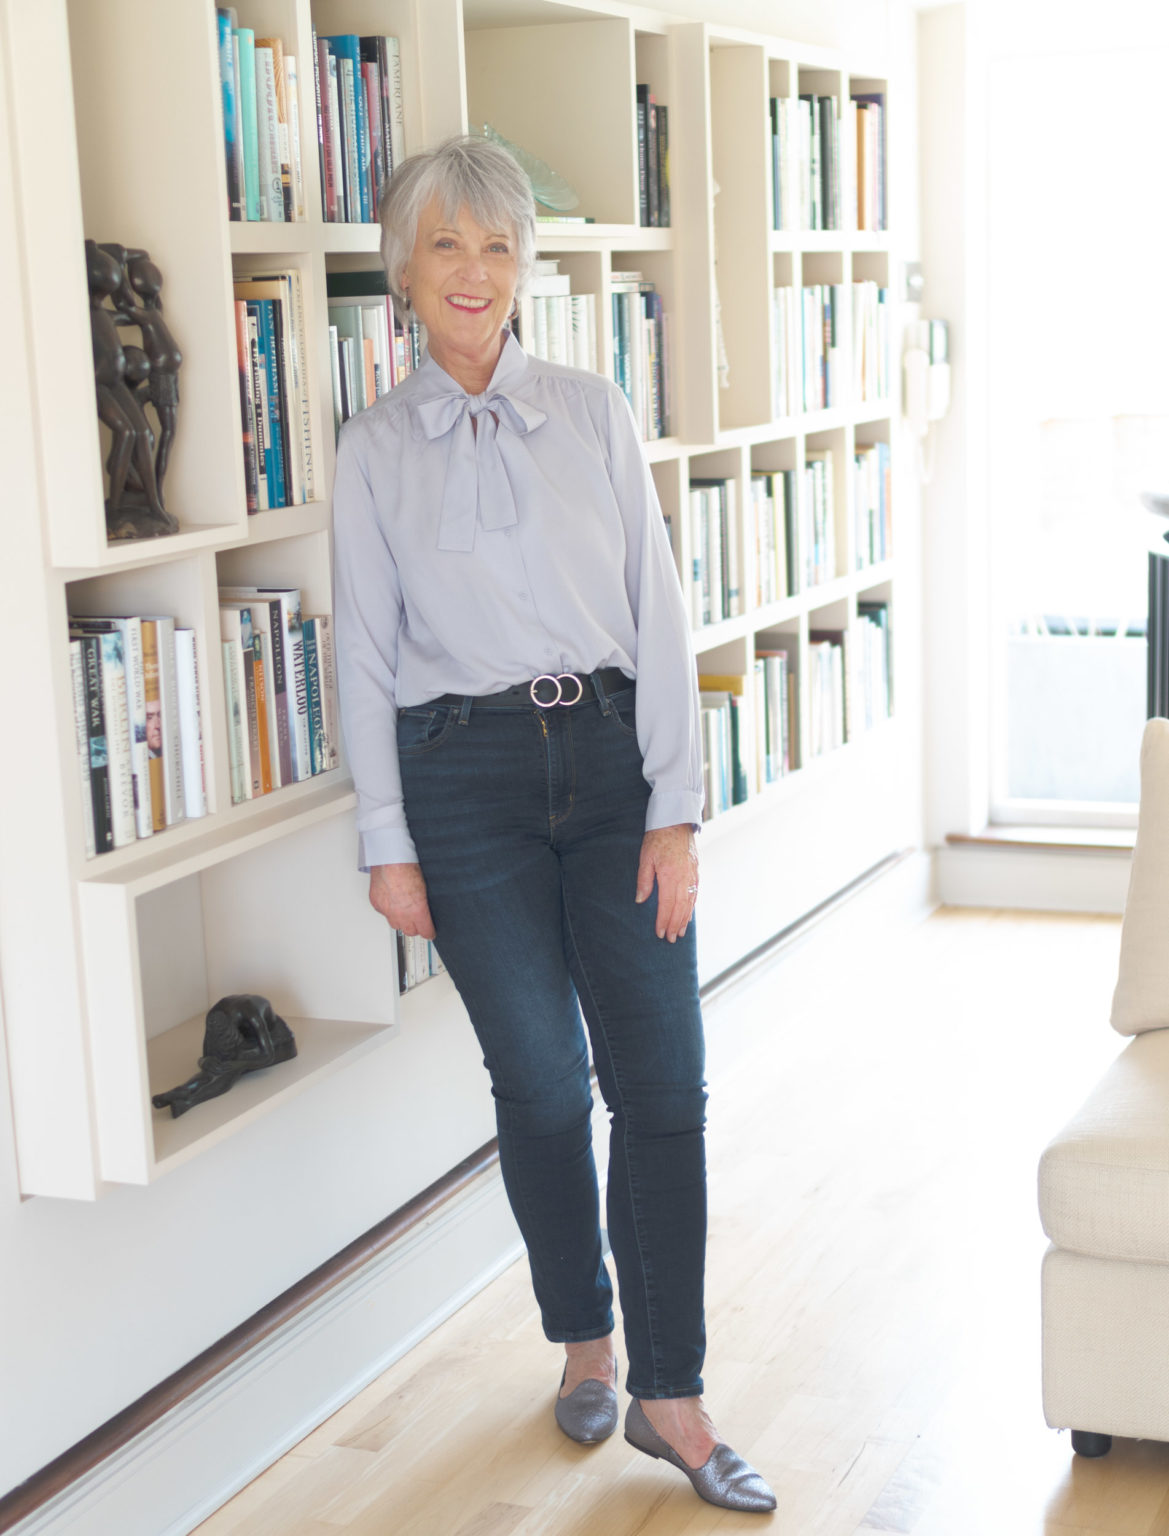 How to wear classic jeans four ways - Chic at any age